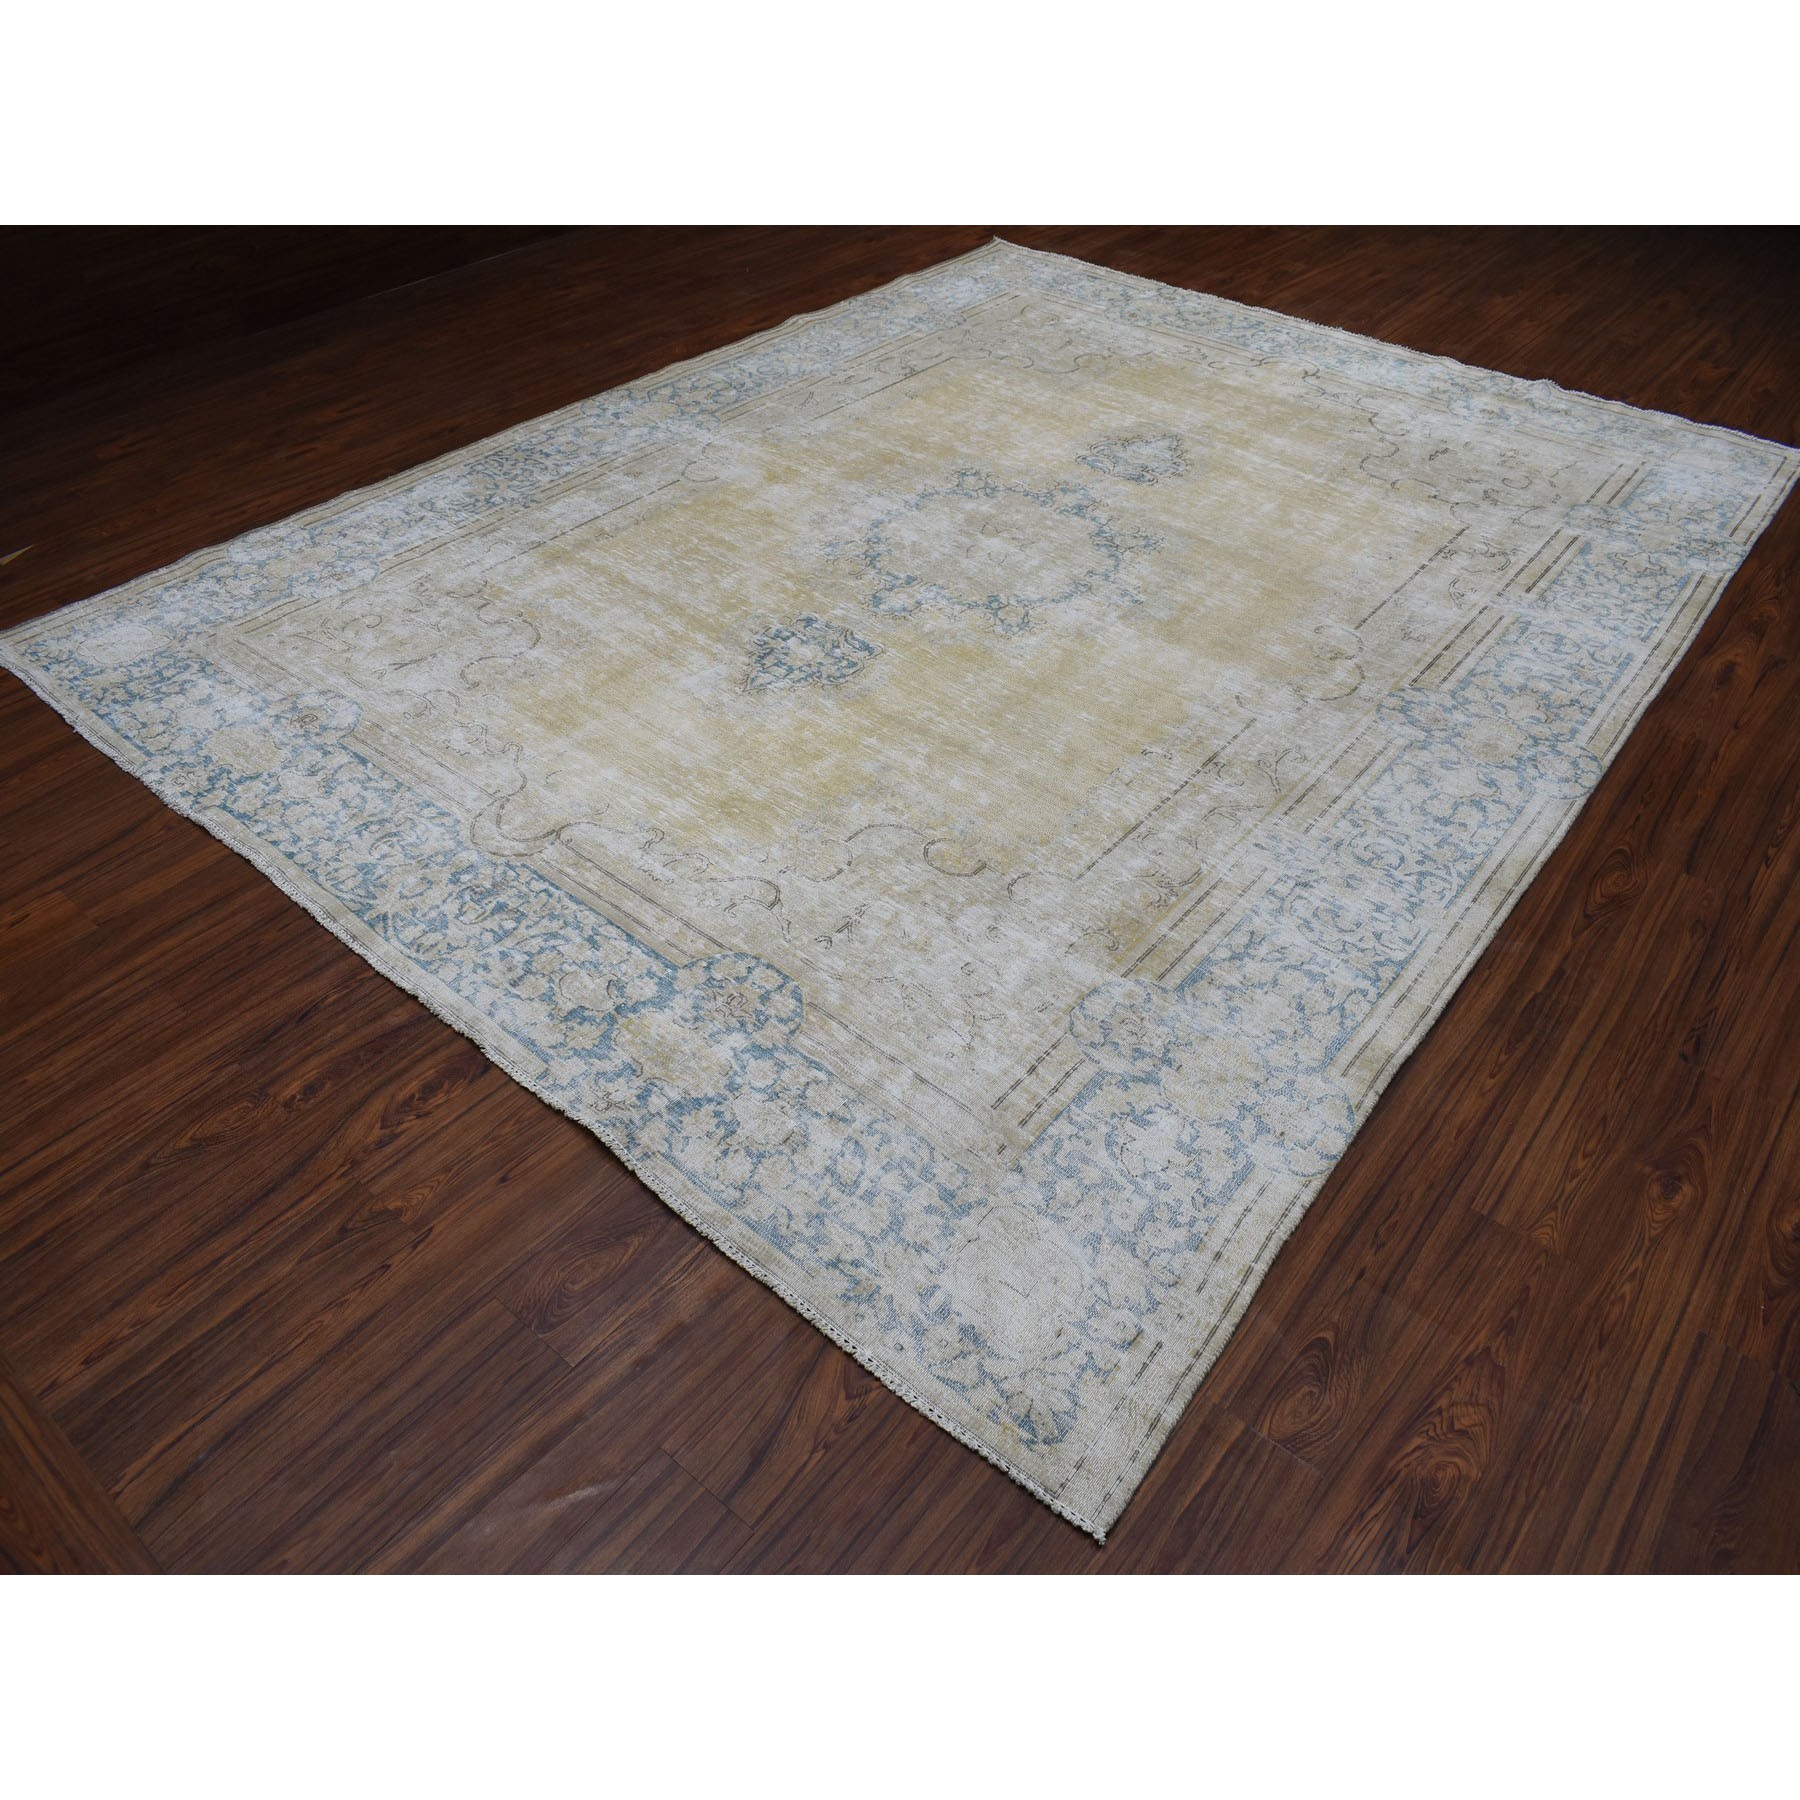 9-6 x12-2  Gold Persian Kerman Vintage Worn Down And Distressed Pure Wool Hand Knotted Oriental Rug 